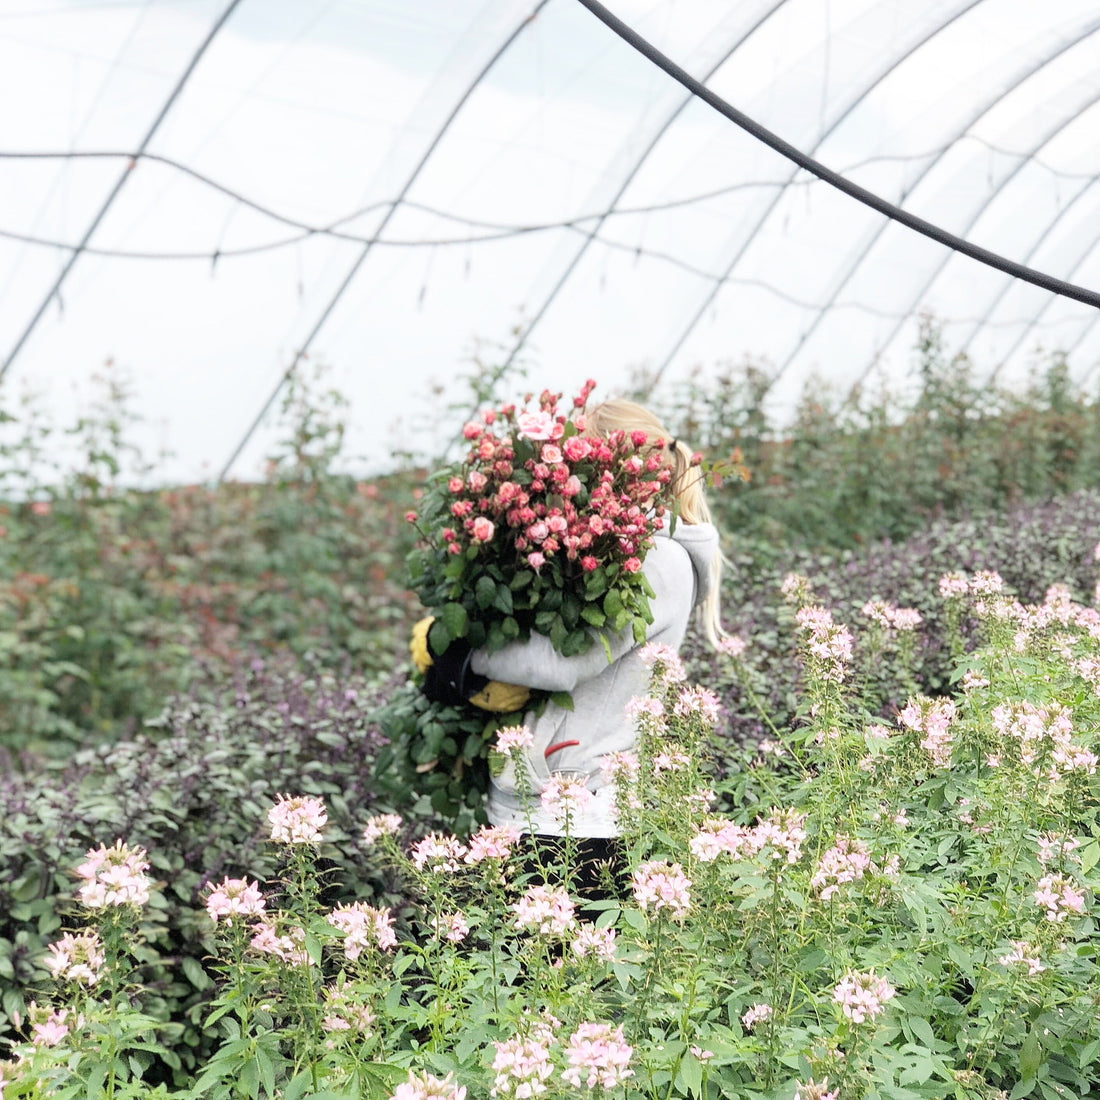 The Reality of Working with British Flowers